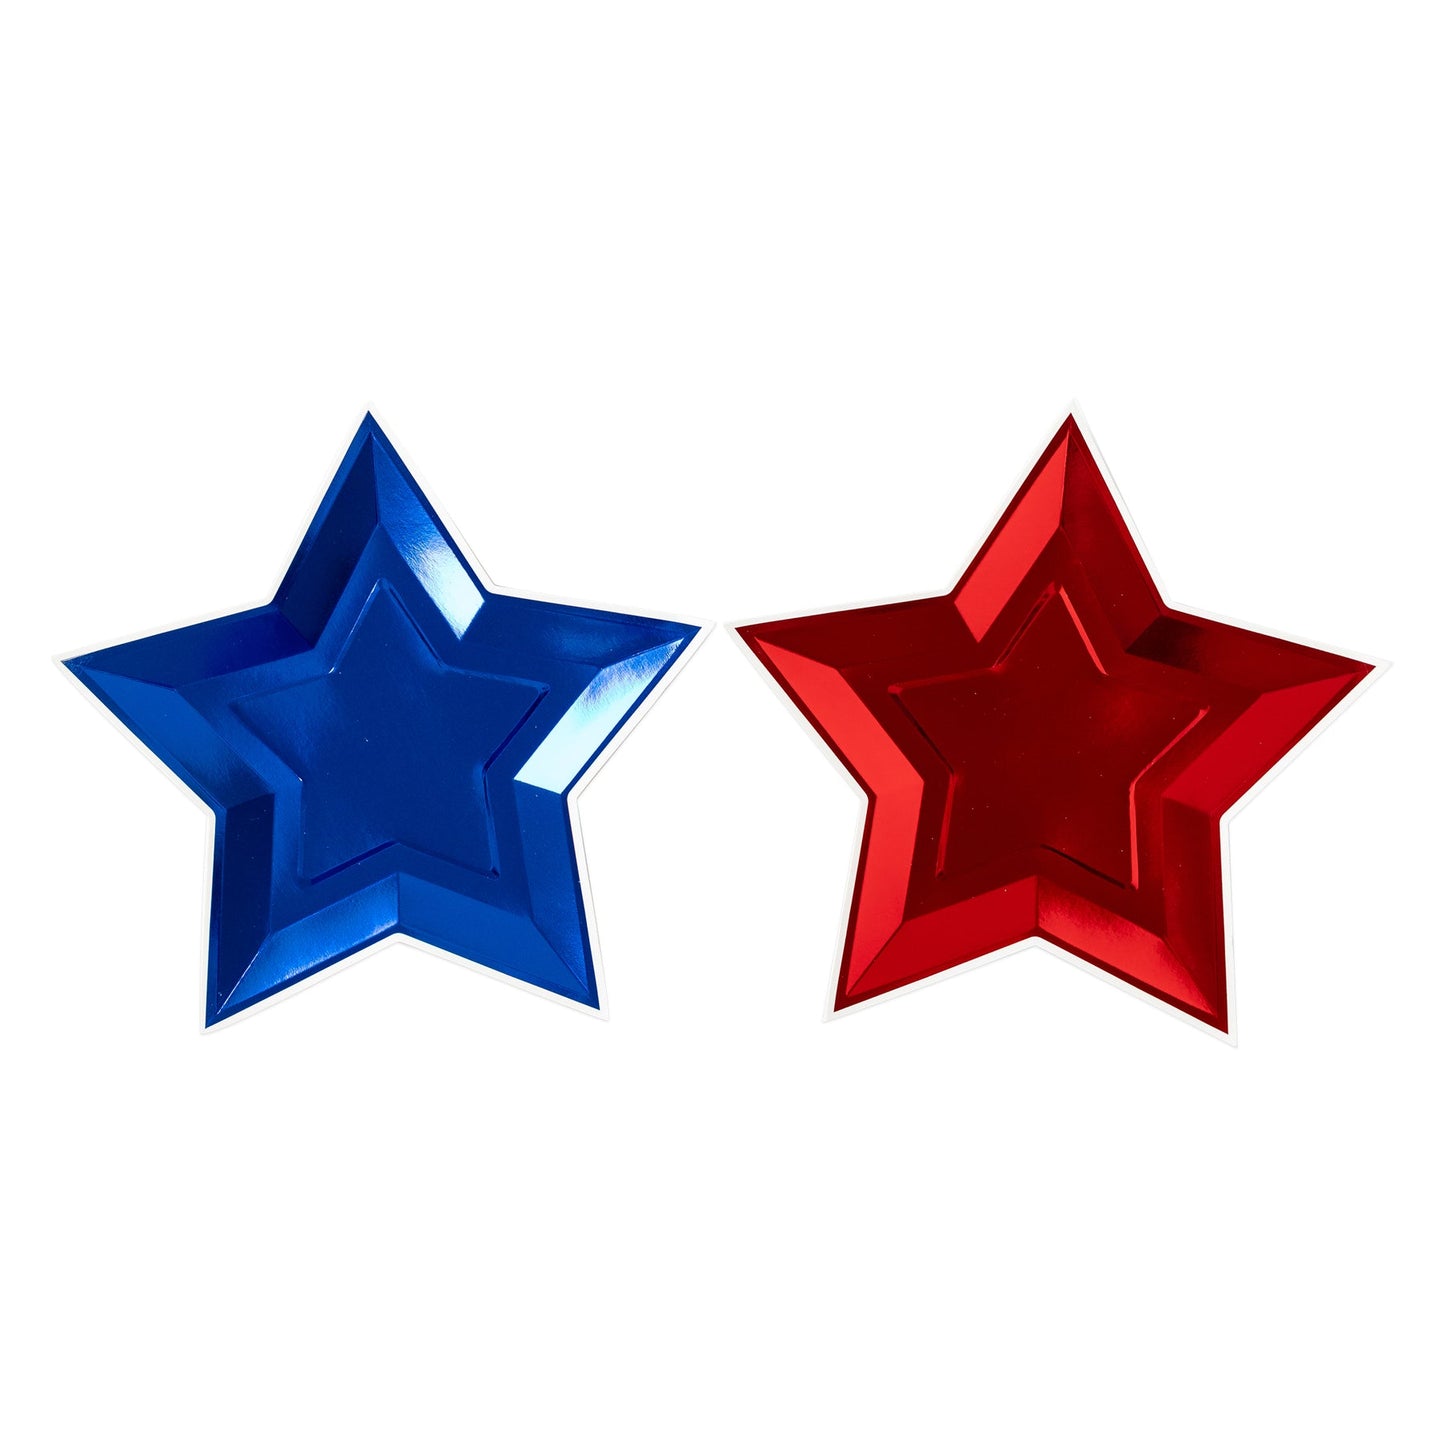 BLUE AND RED FOIL STAR SHAPED PAPER PLATE